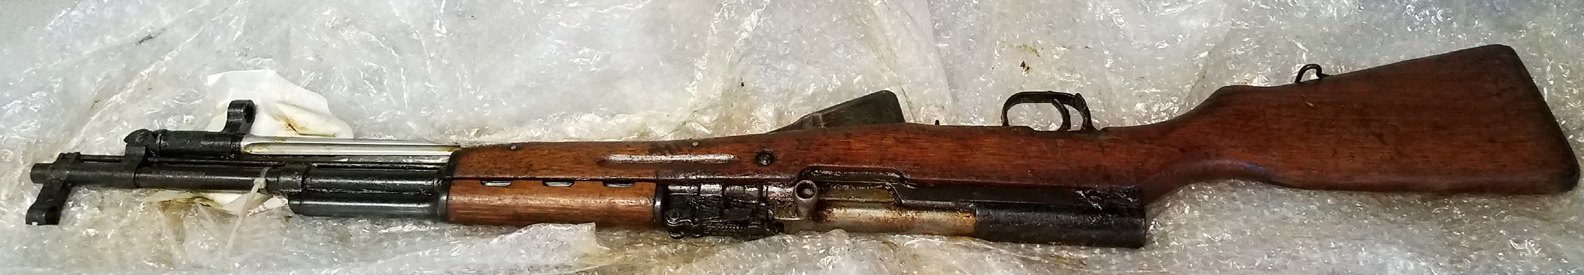 Buying Milsurp: Removing Cosmoline from the SKS